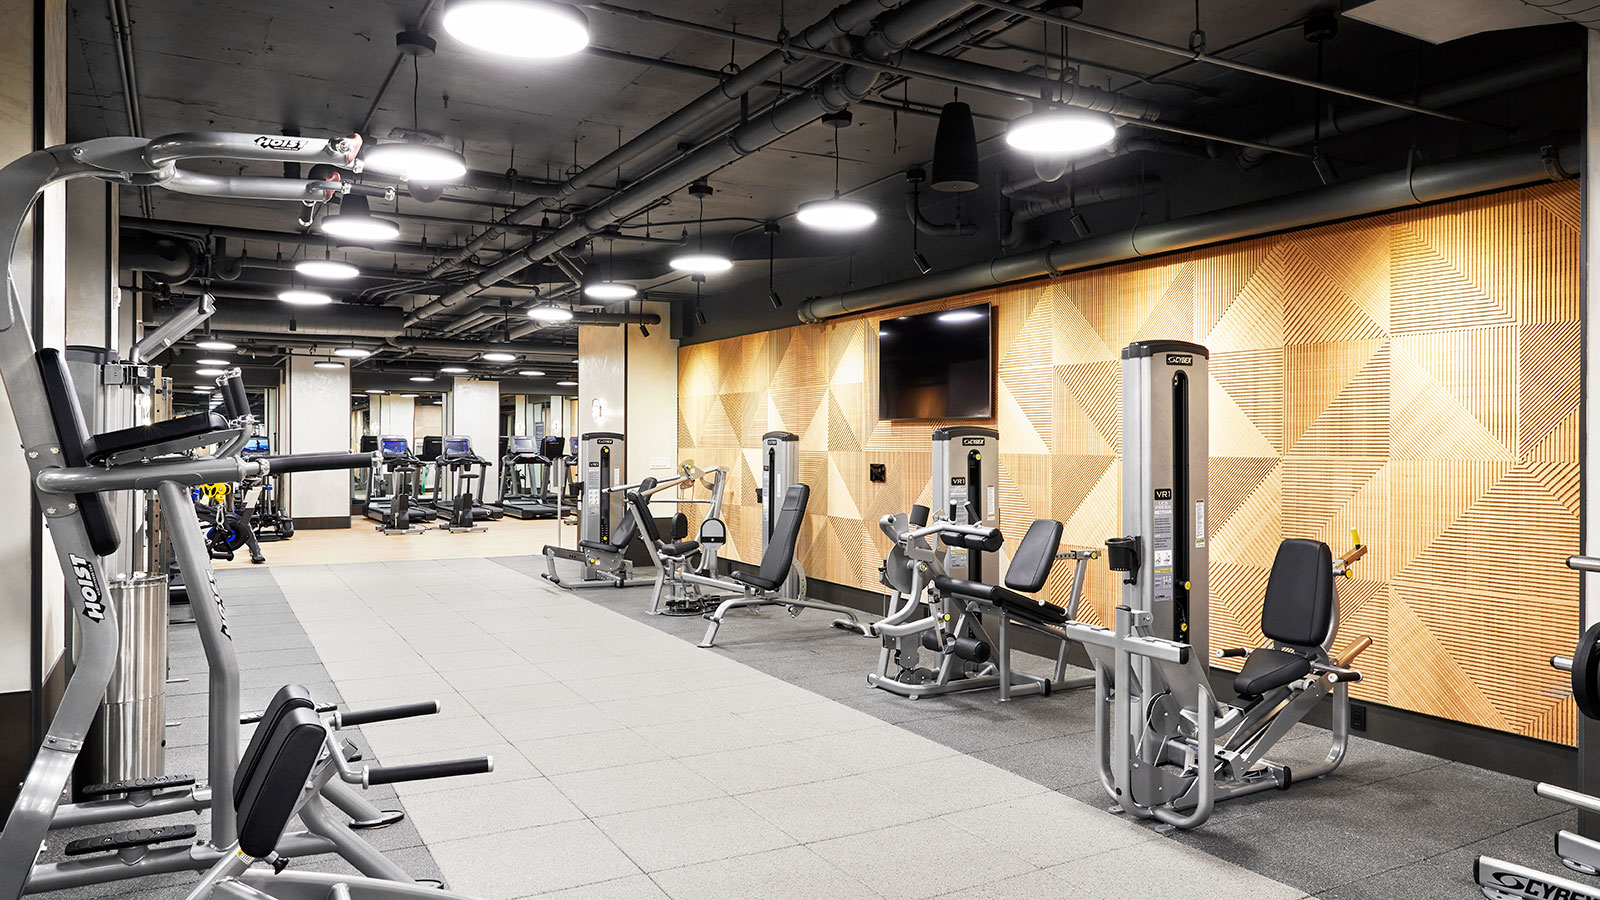 Fitness center at 200 W. 60 with state-of-the-art fitness equipment